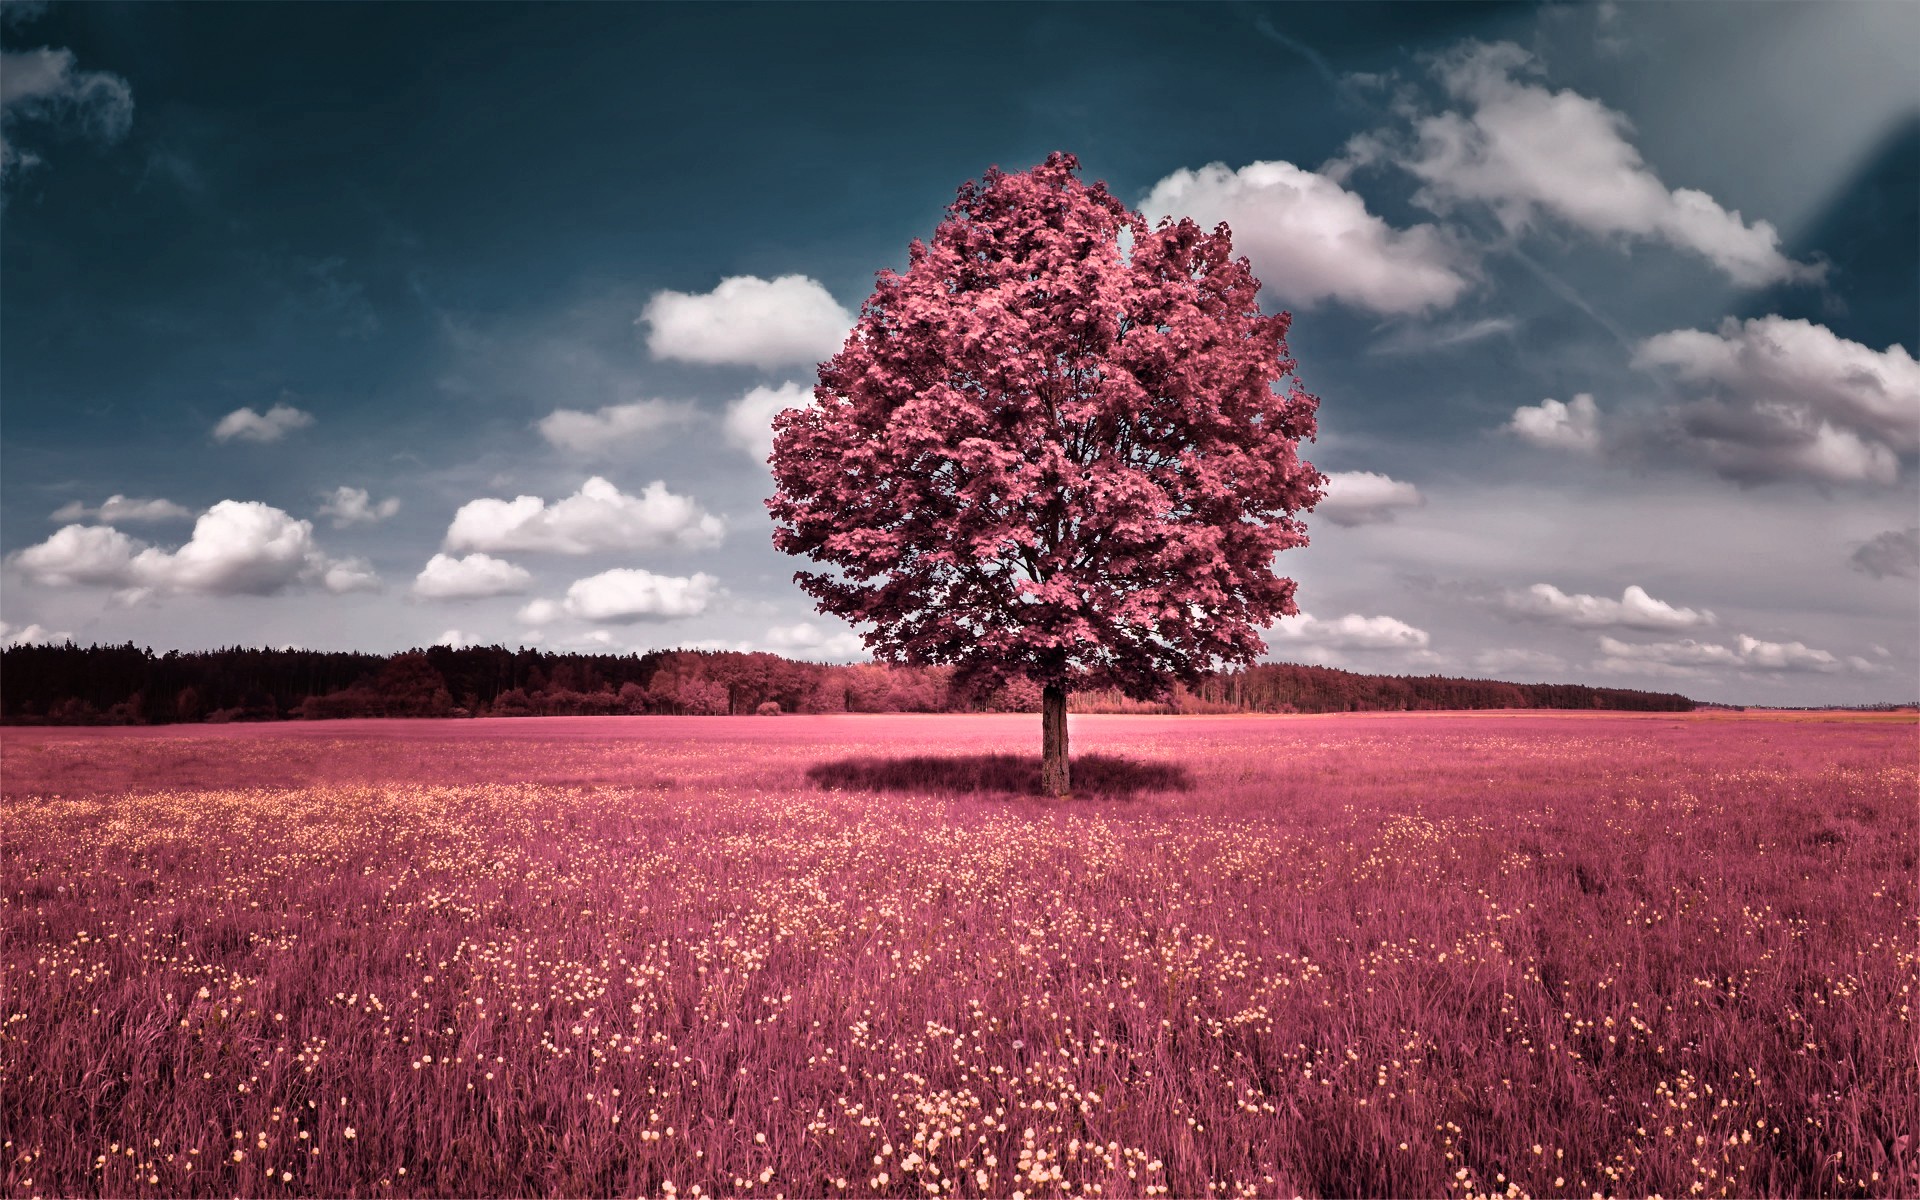 clouds, Landscapes, Trees, Flowers, Pink, Grass, Fields, Hills, Skyscapes Wallpaper